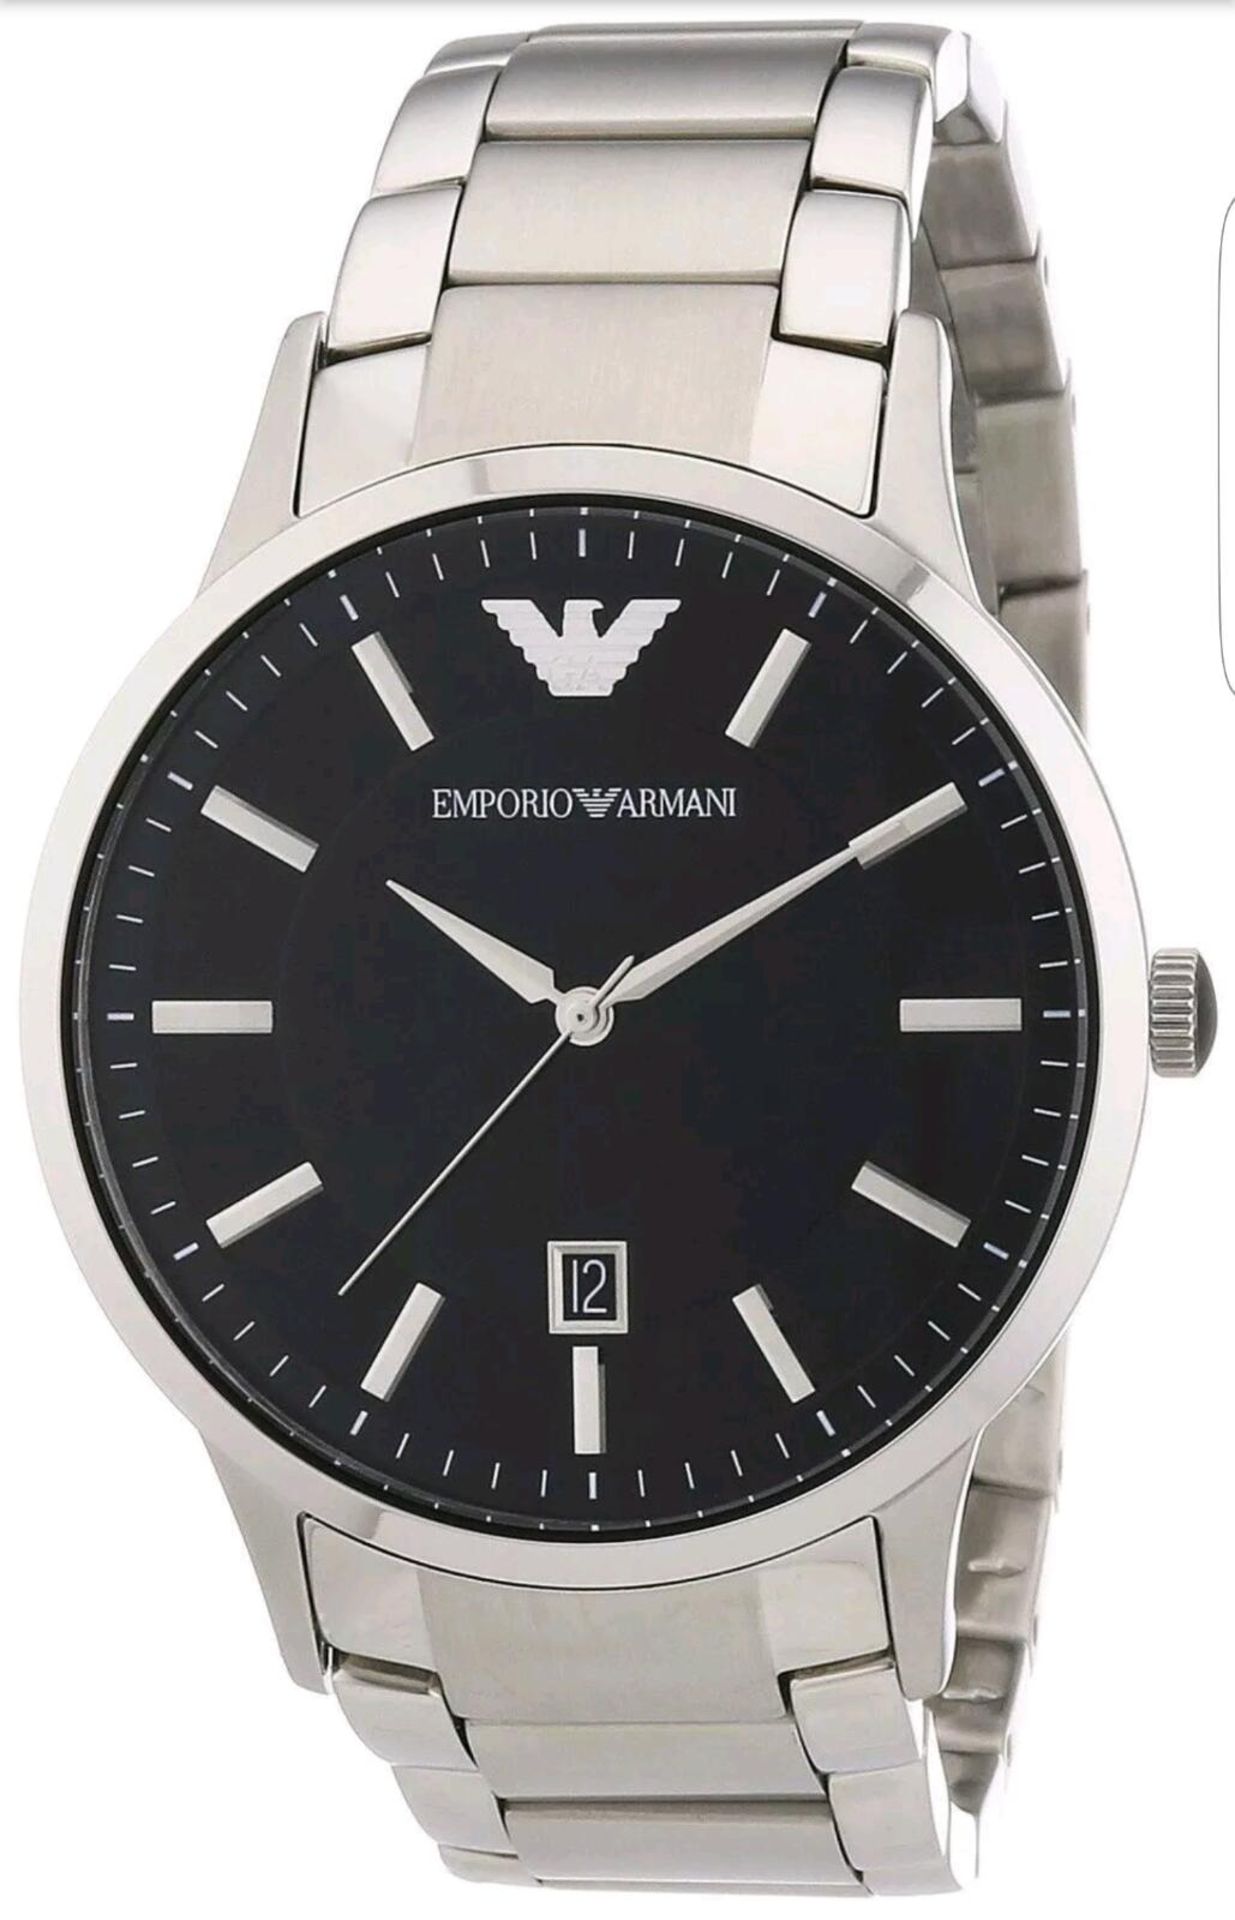 BRAND NEW EMPORIO ARMANI AR2457 GENTS SPORTIVO BLACK DIAL WATCH, COMPLETE WITH ORIGINAL BOX AND